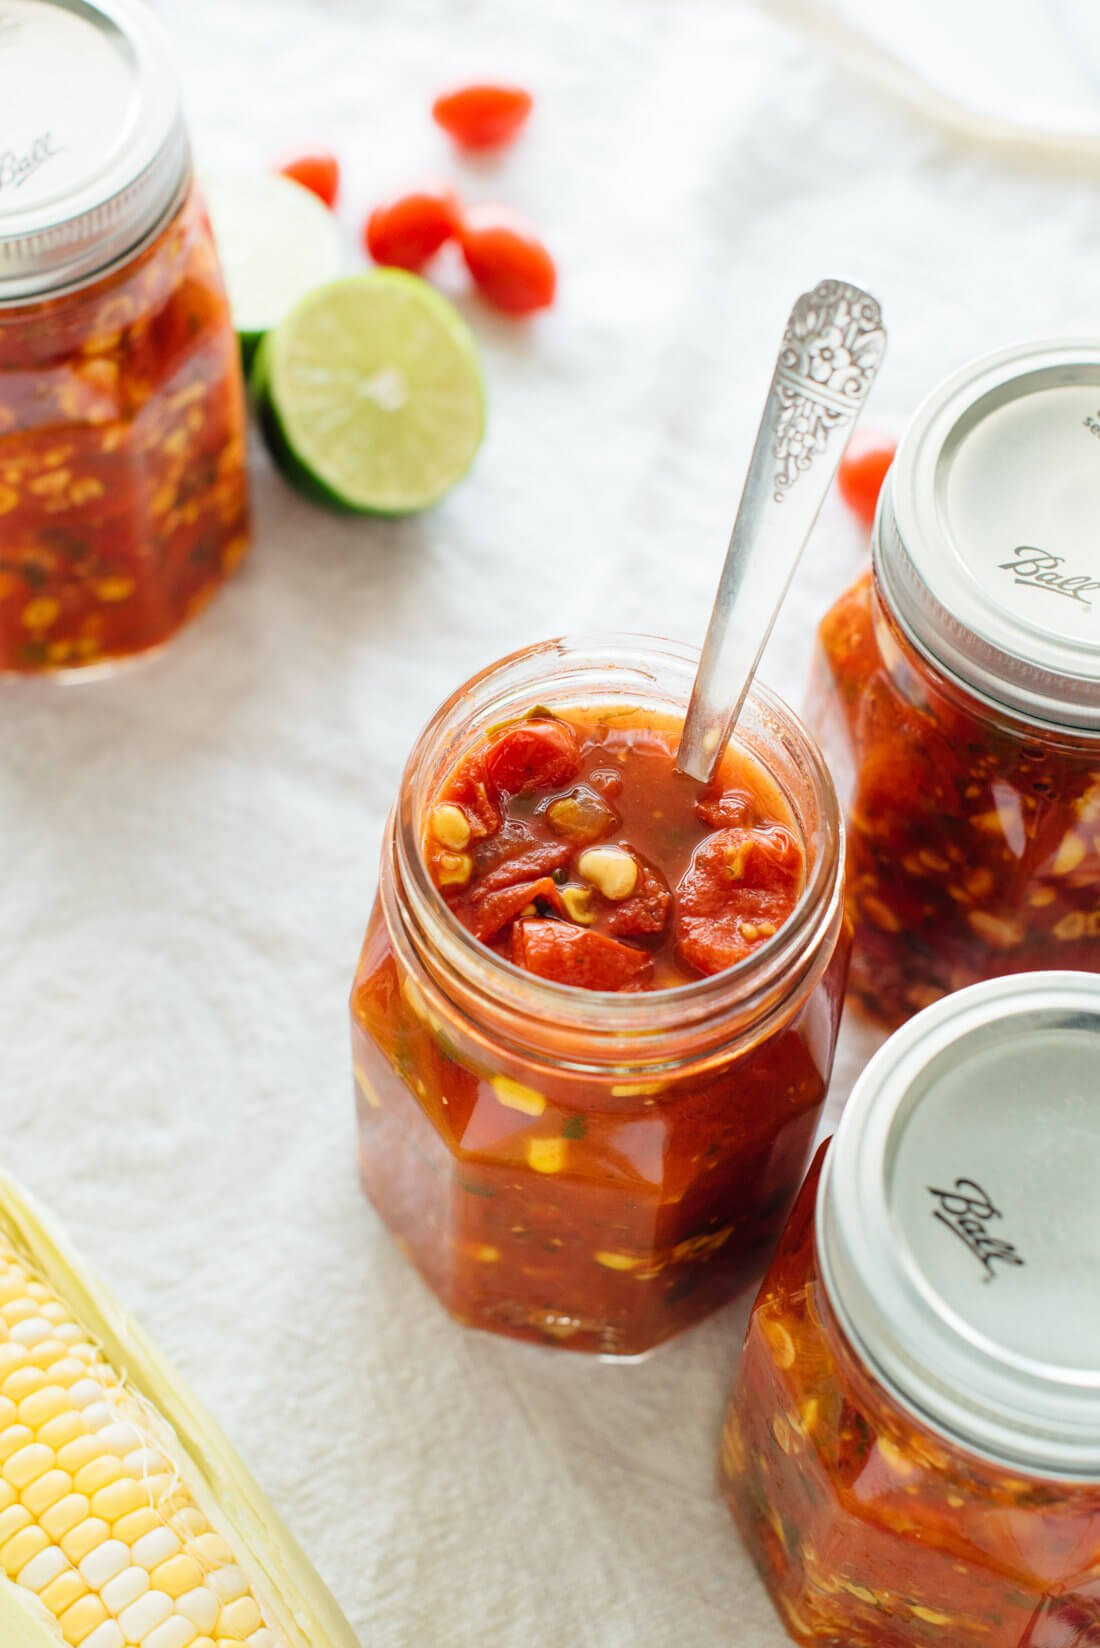 Tomato Salsa Recipe For Canning
 The top 23 Ideas About Cherry tomato Salsa Recipe Canning